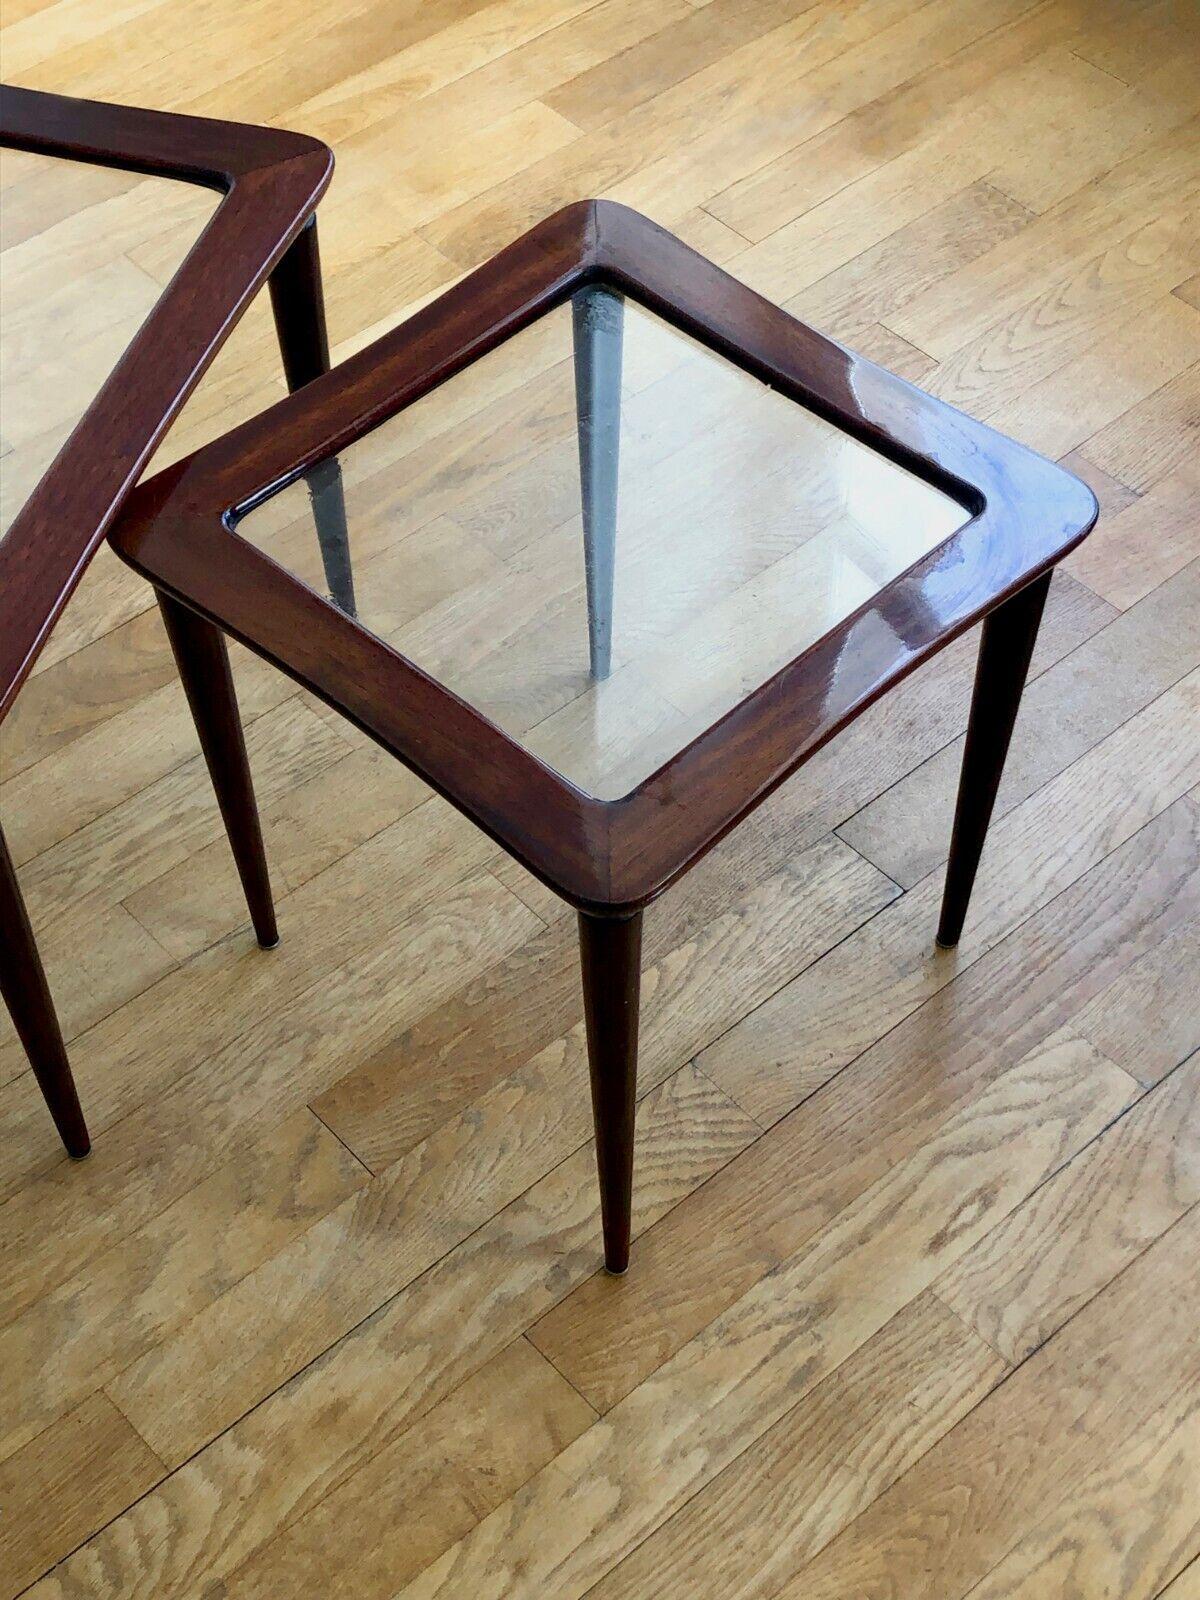 Mahogany 3 MID-CENTURY-MODERN Gigogne TABLES by ICO PARISI, for DE BAGGIS, Italy 1950 For Sale